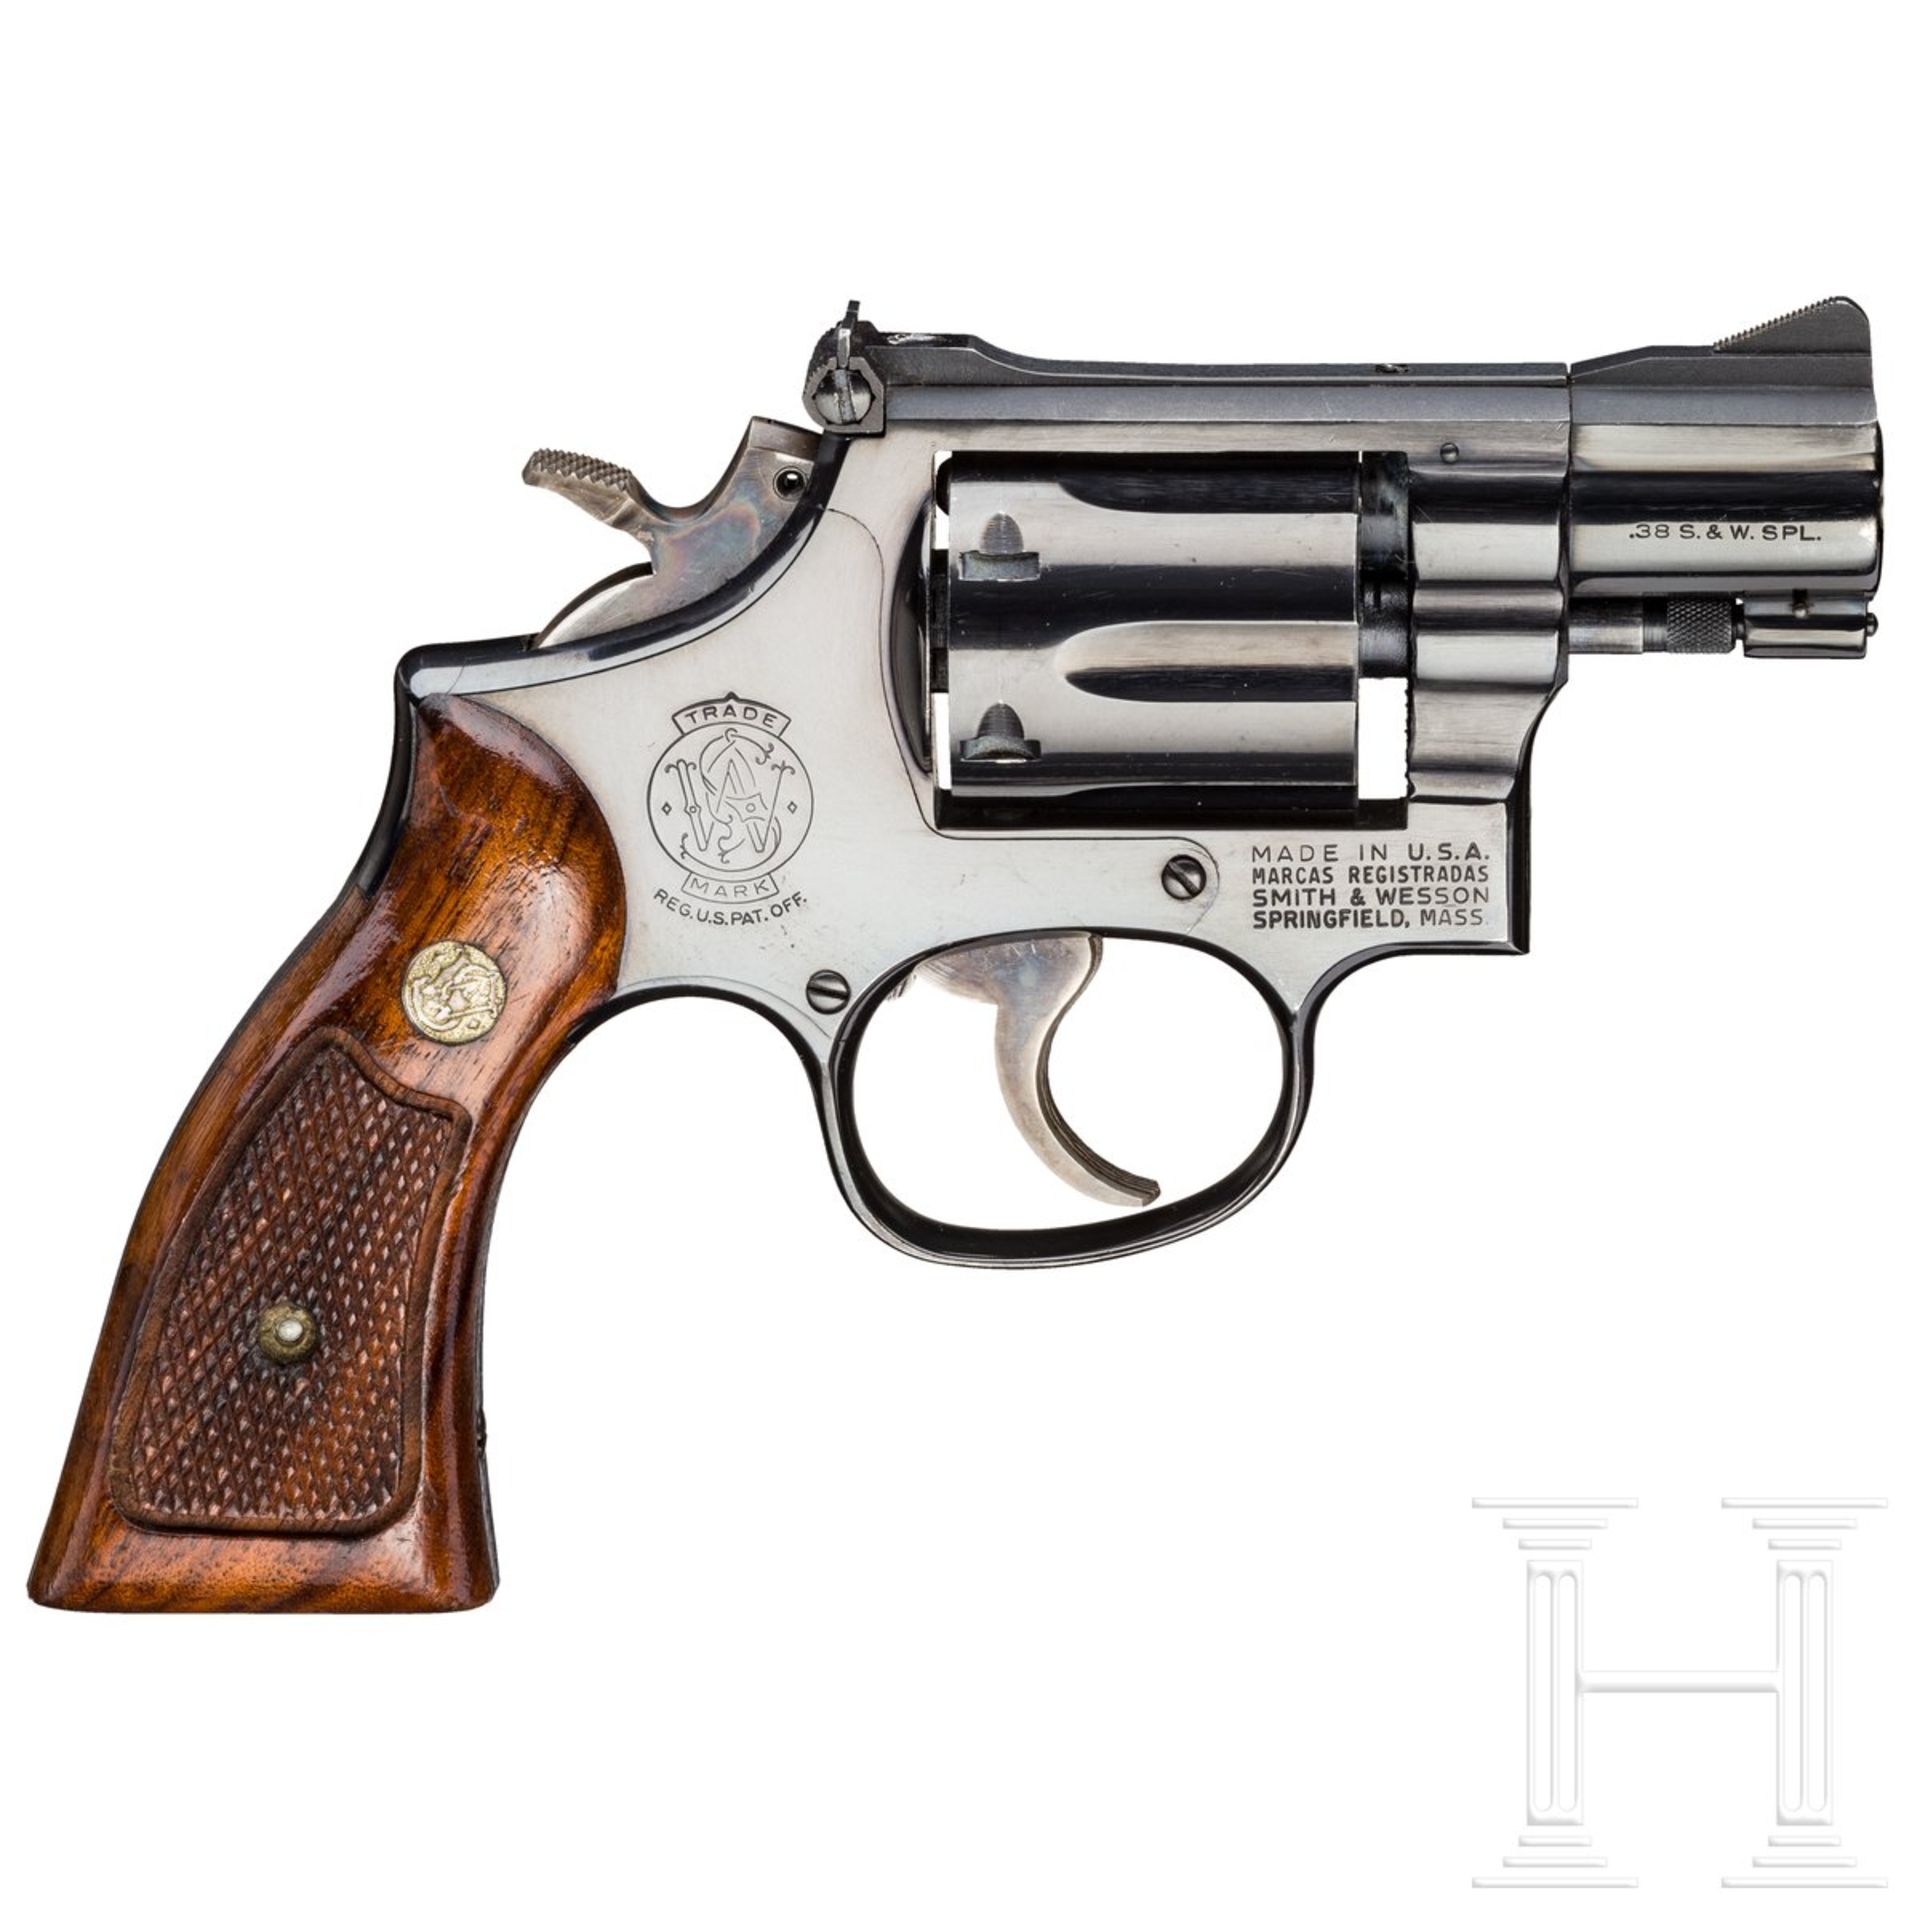 Smith & Wesson Mod. 15-3, "The K-38 Combat Masterpiece" - Image 2 of 2